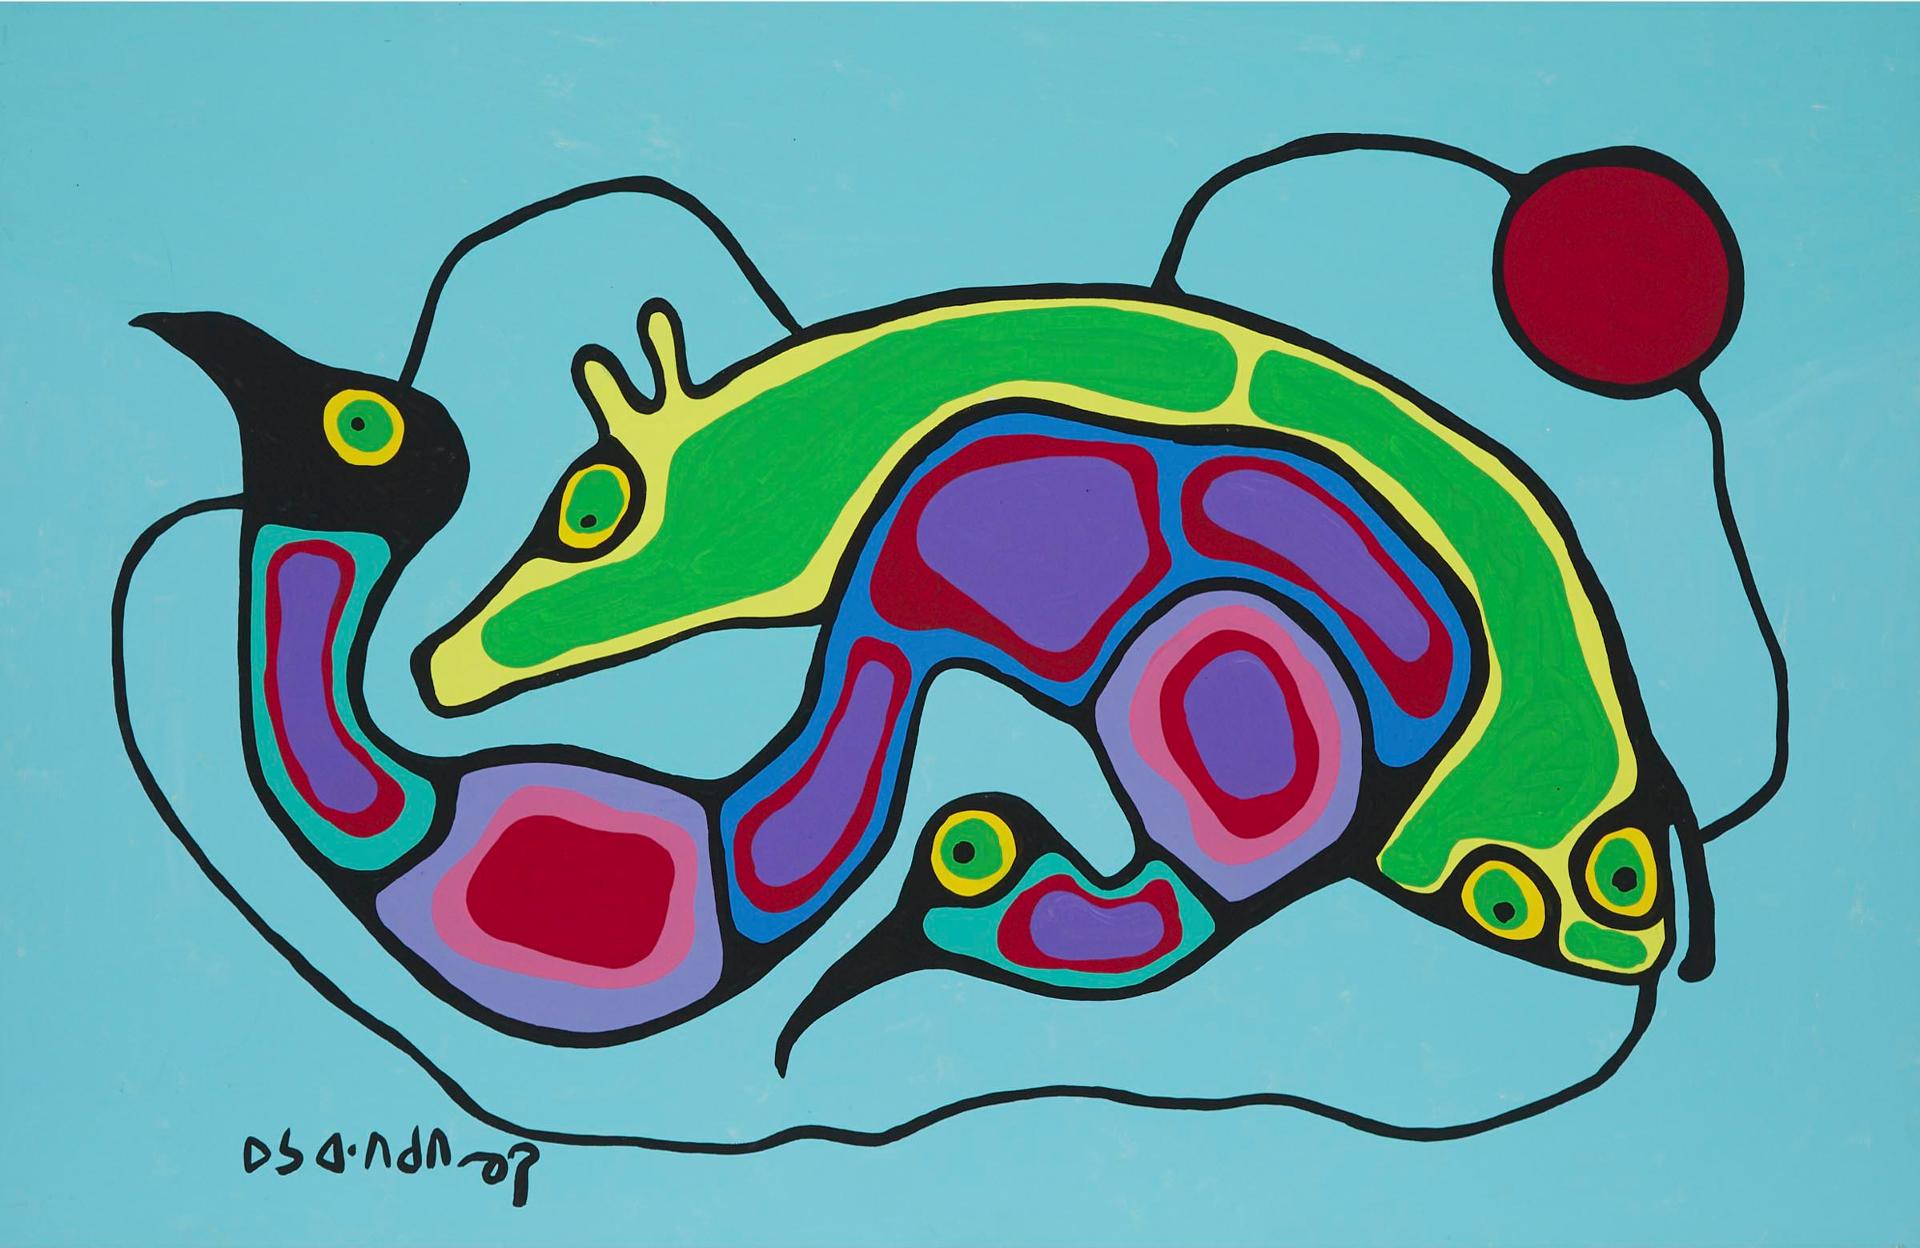 Norval H. Morrisseau (1931-2007) - Coming Alive, Circa 1991